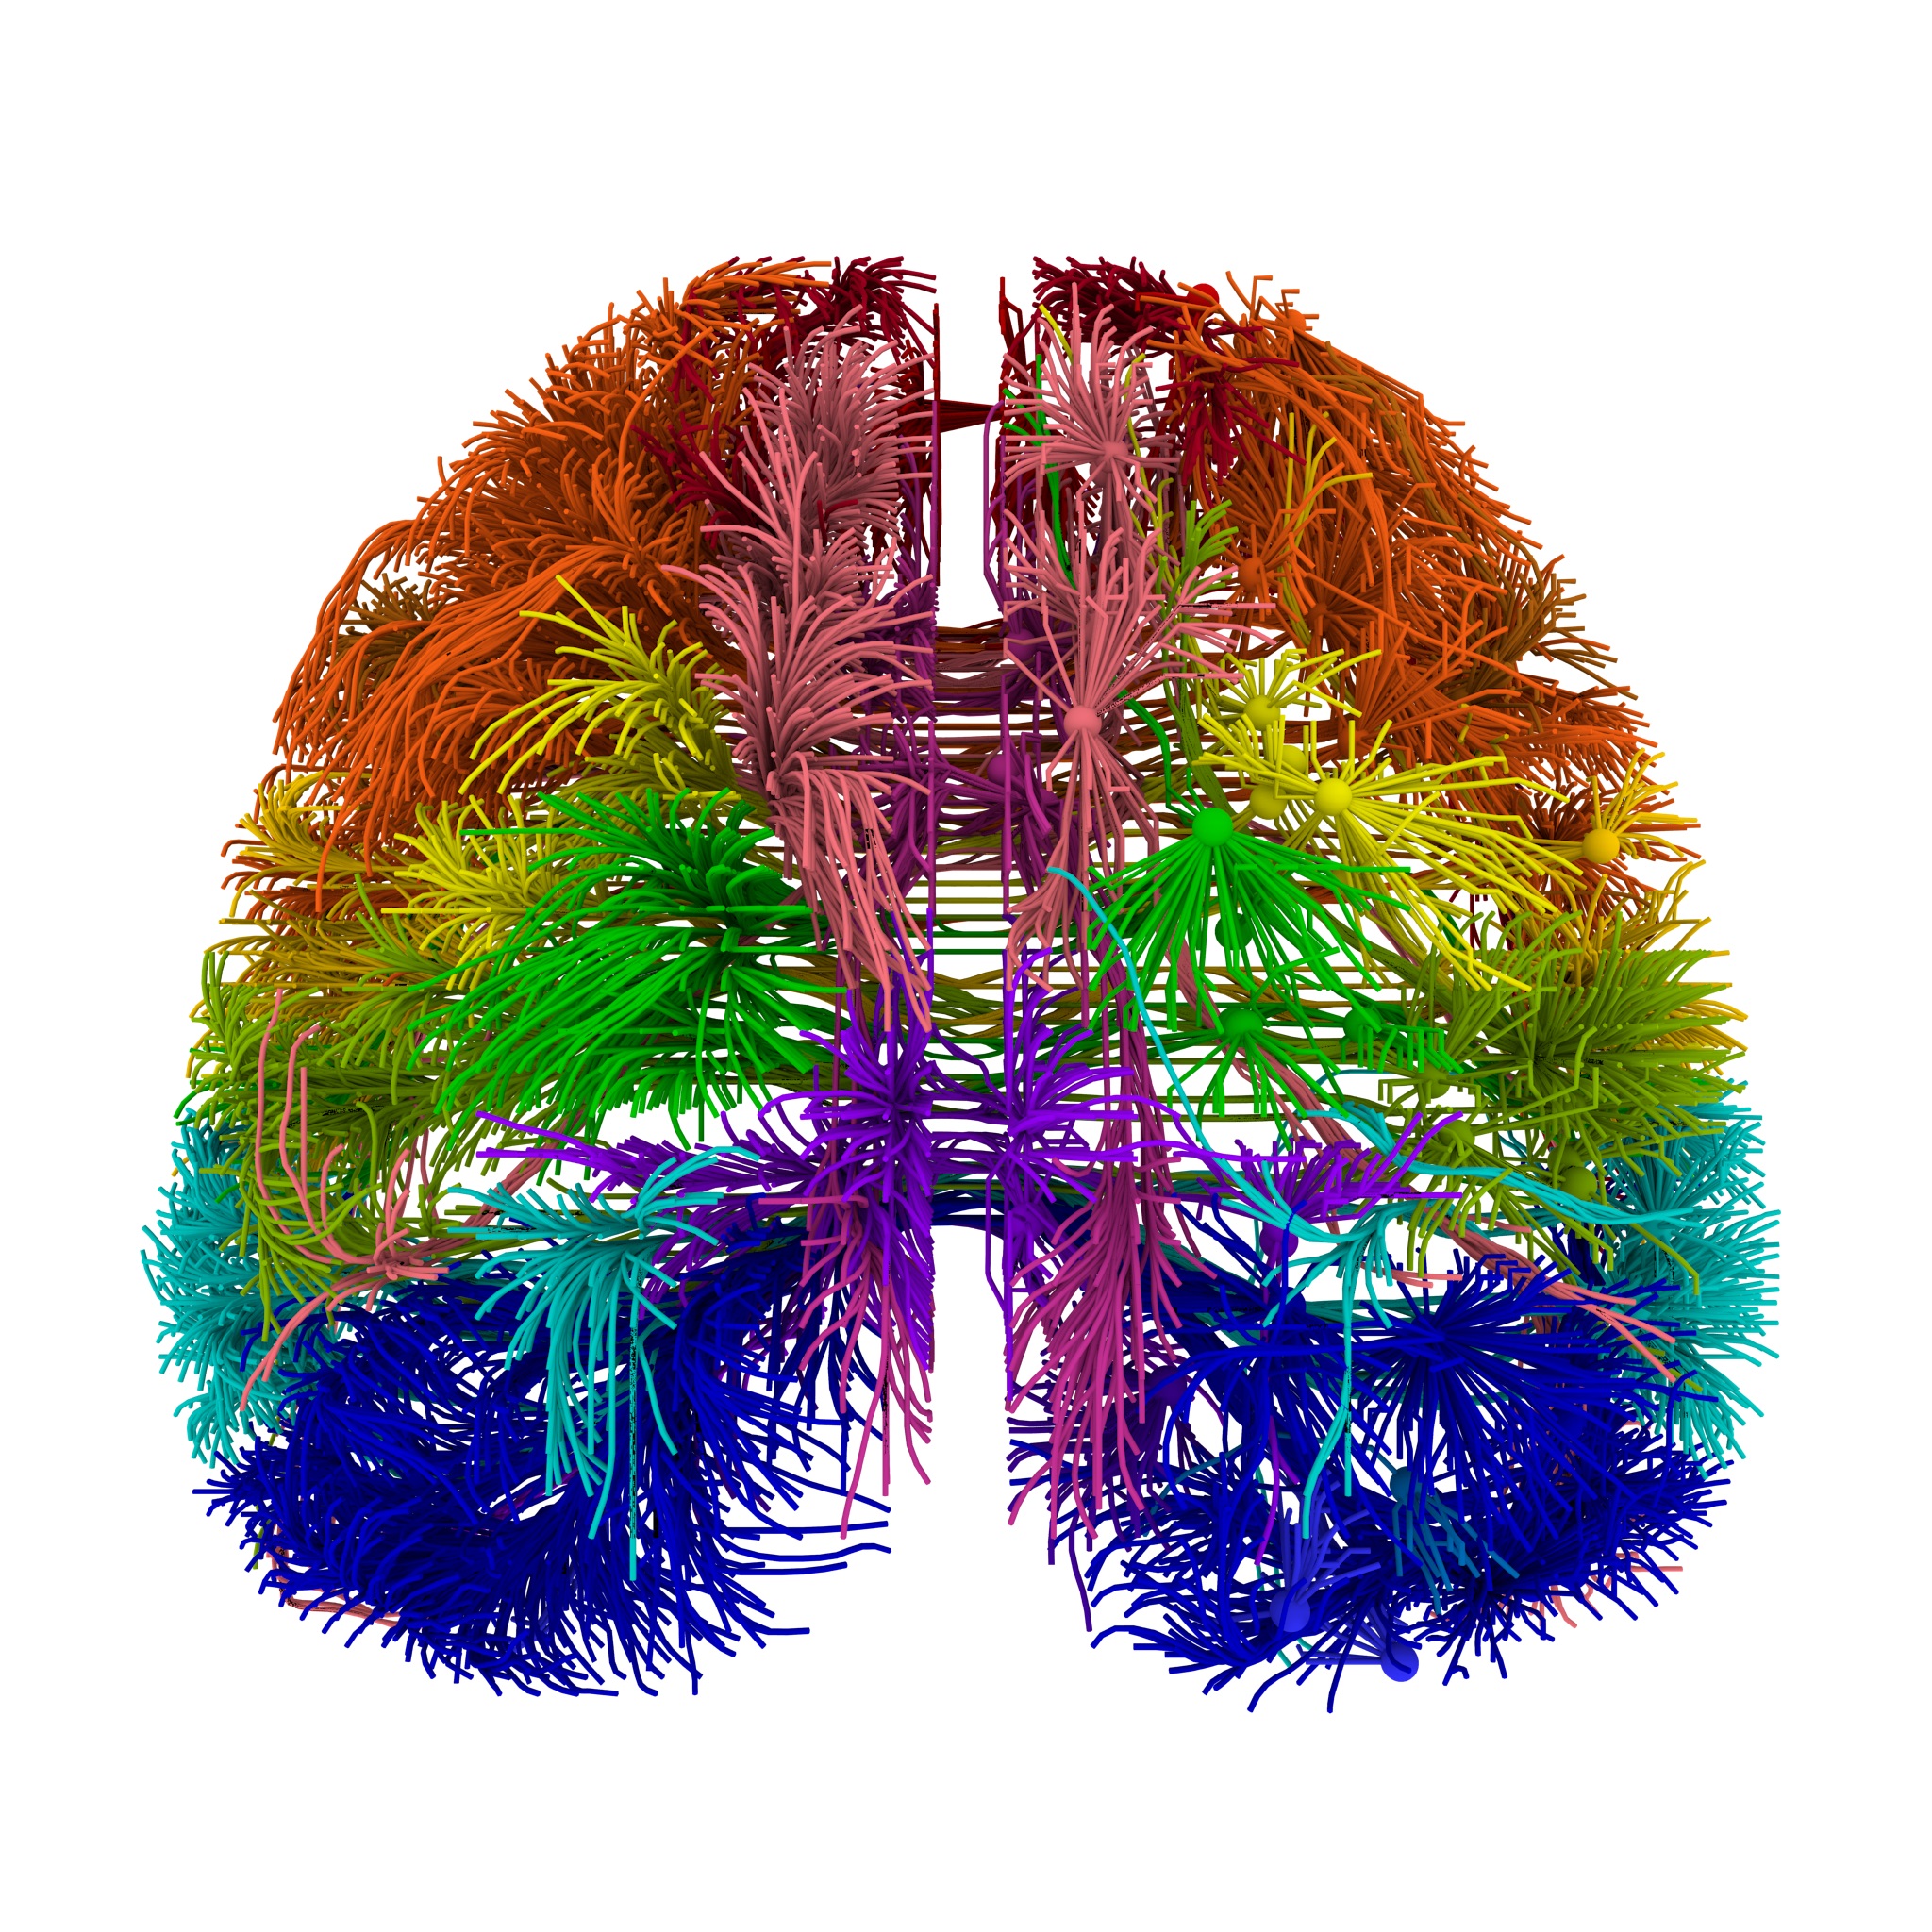 First Wiring Diagram of Mouse Brain Created - D-brief